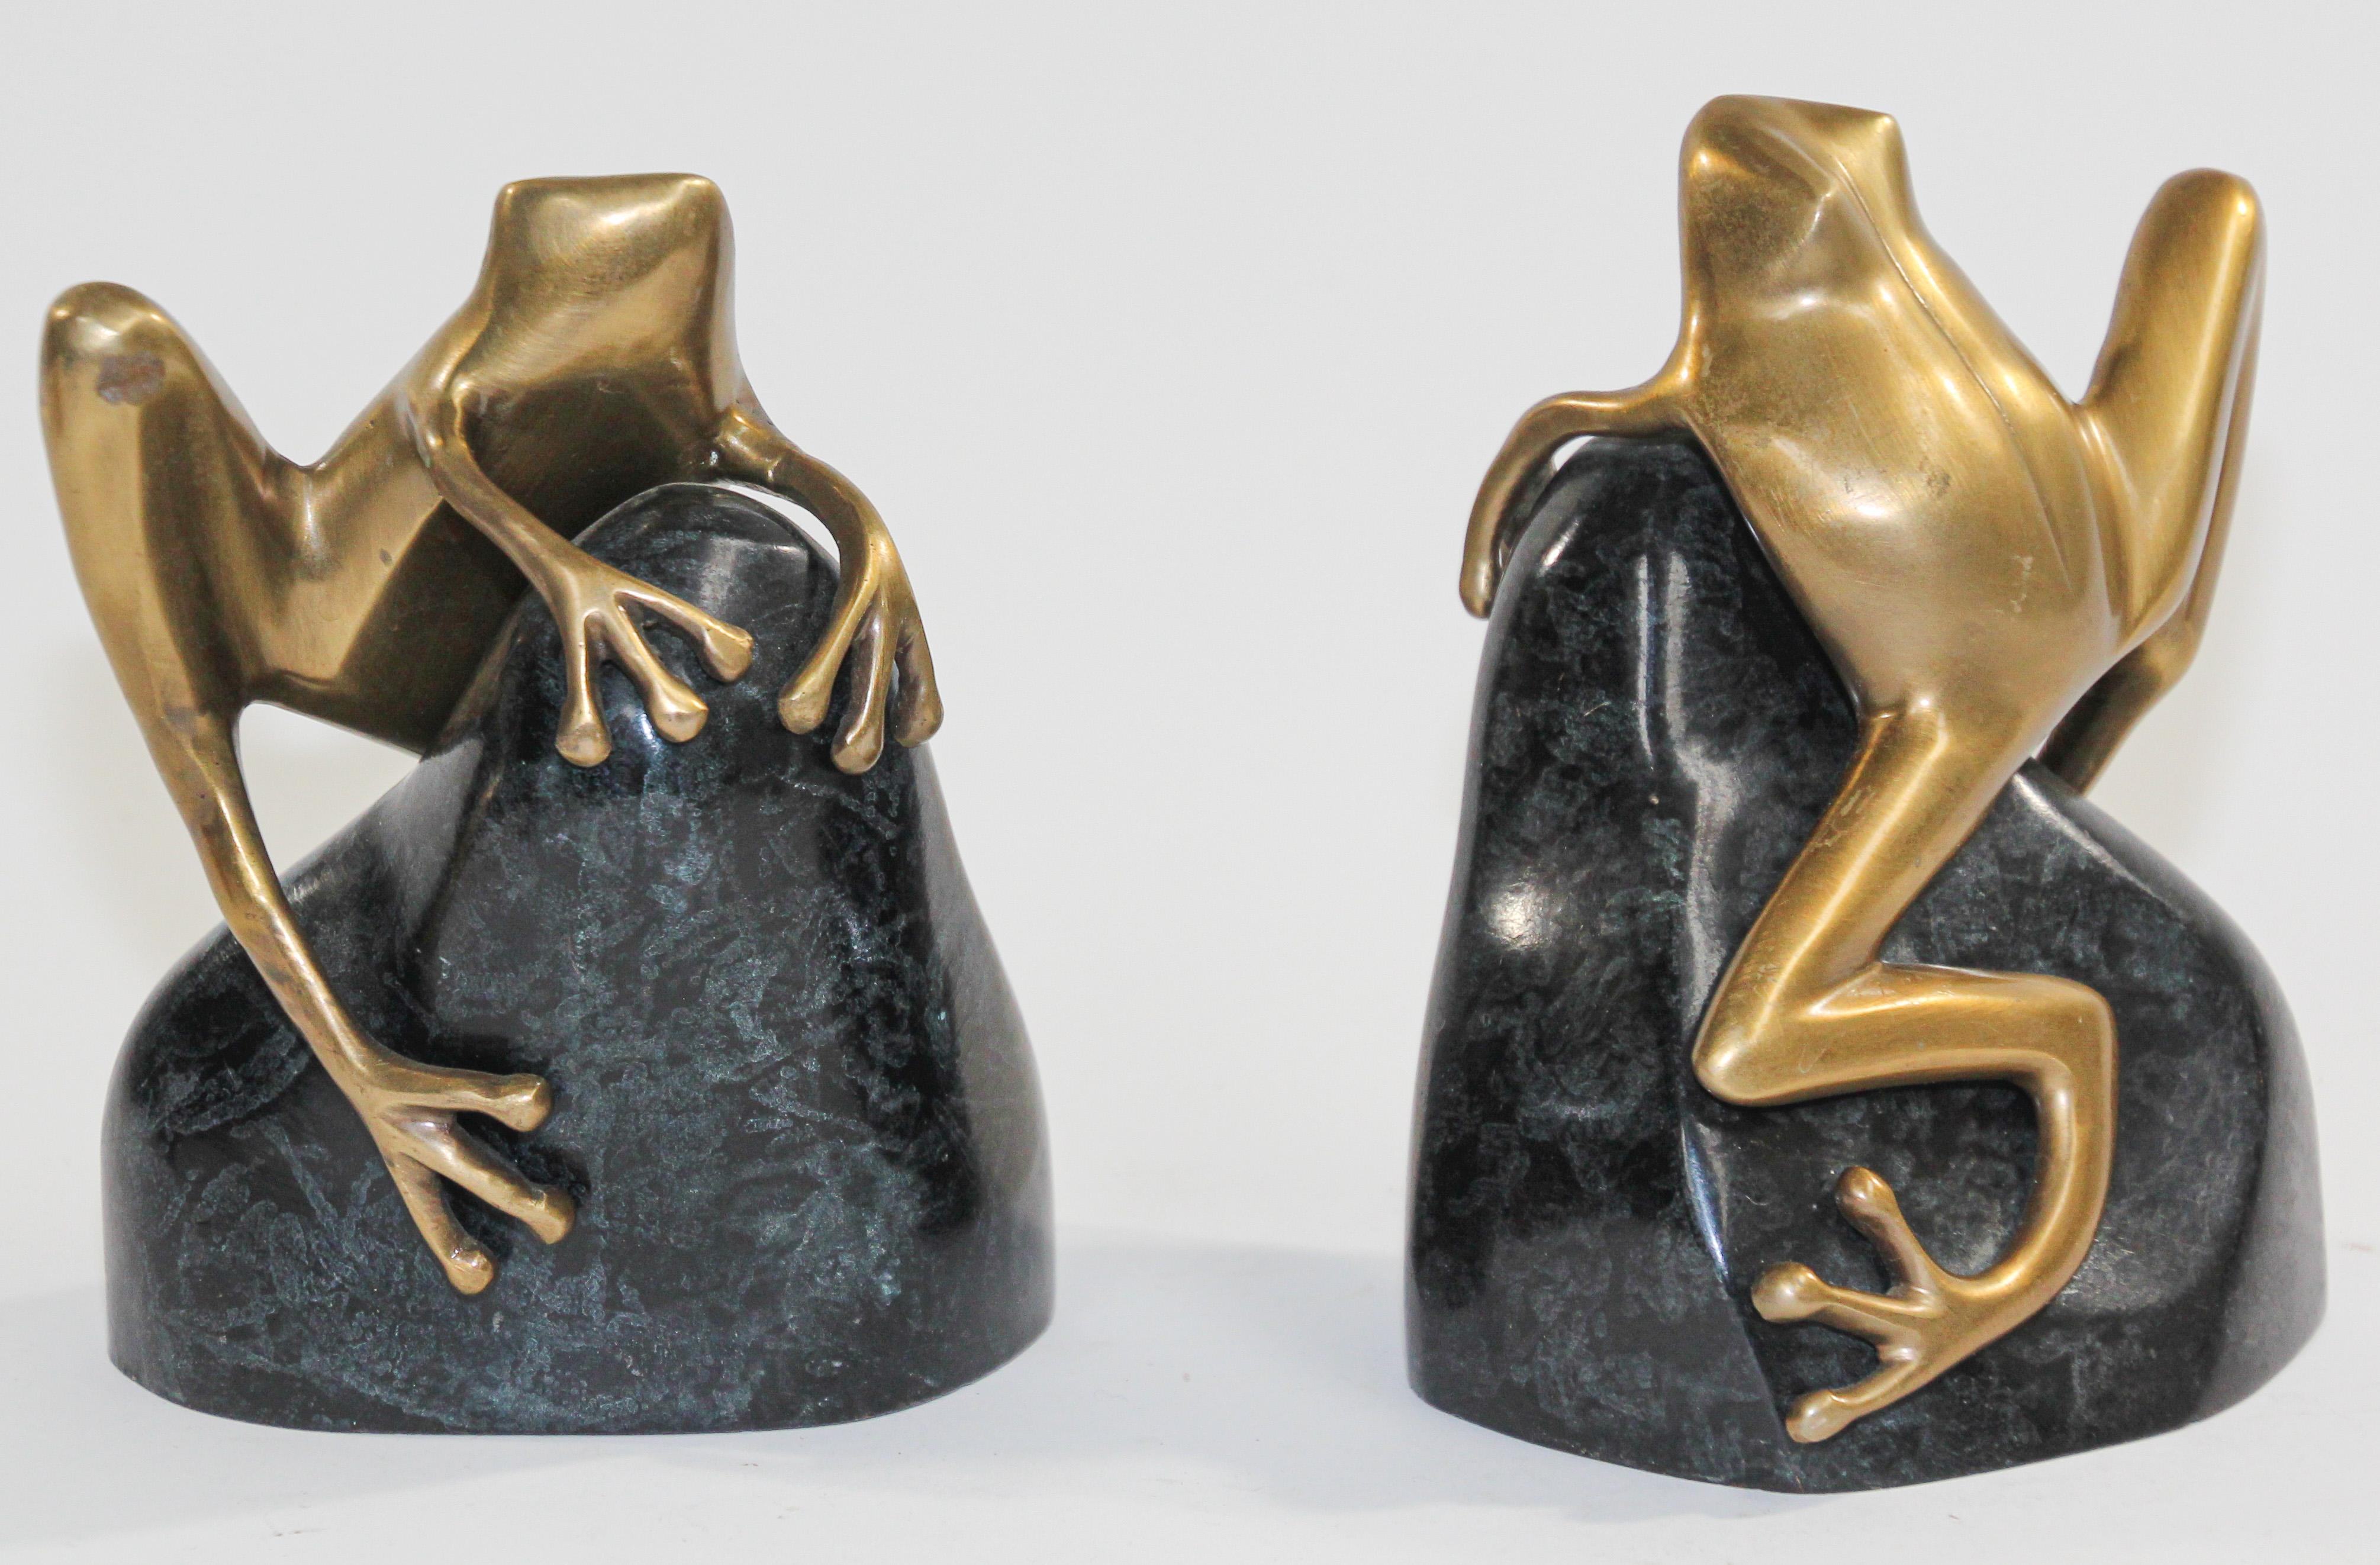 Pair of polished cast metal brass Art Deco style decorative frog bookends.
Set of unique heavy polished gold brass large frog sculptures on a green bronze patinated green rock.
Size for each is 6